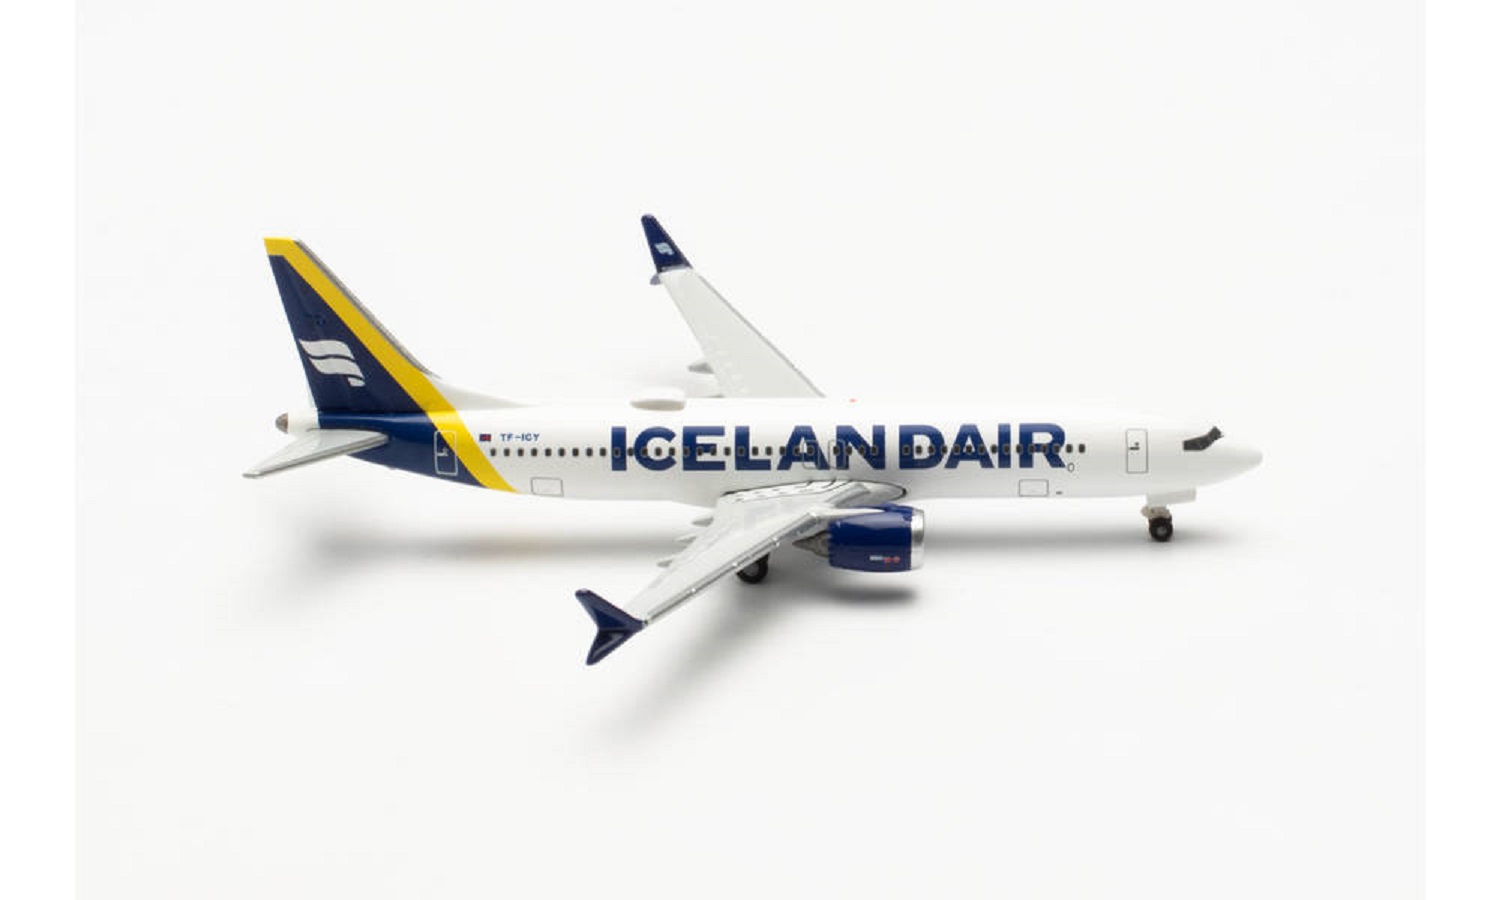 Boeing 737 Max 8 Icelandair new colors (yellow tail stripe)